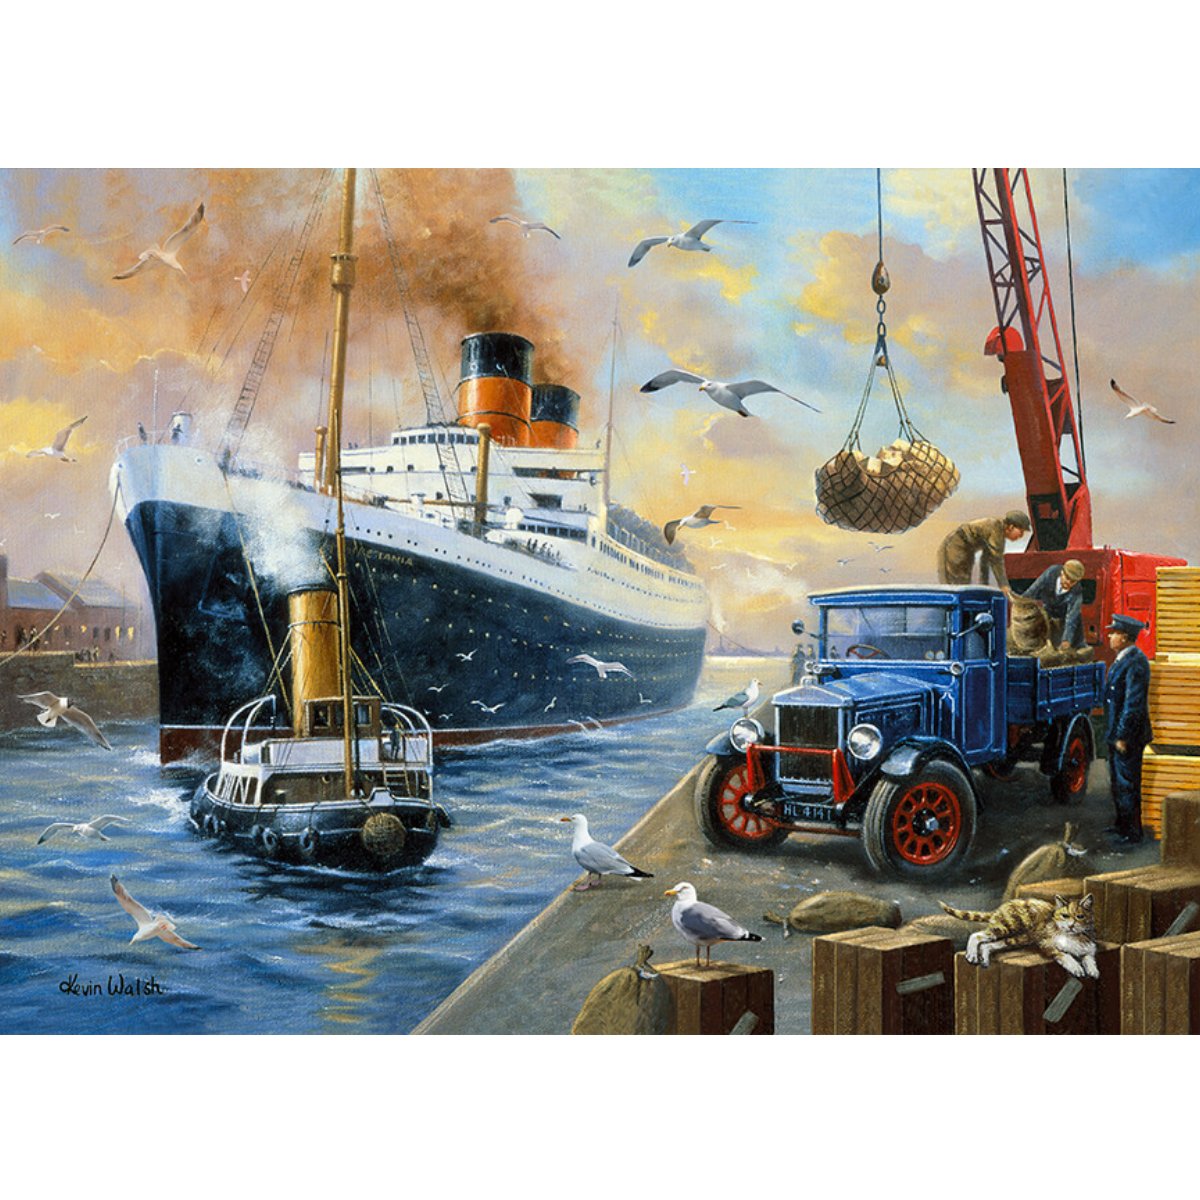 Entering Port - Kevin Walsh 1000 Piece Jigsaw Puzzle